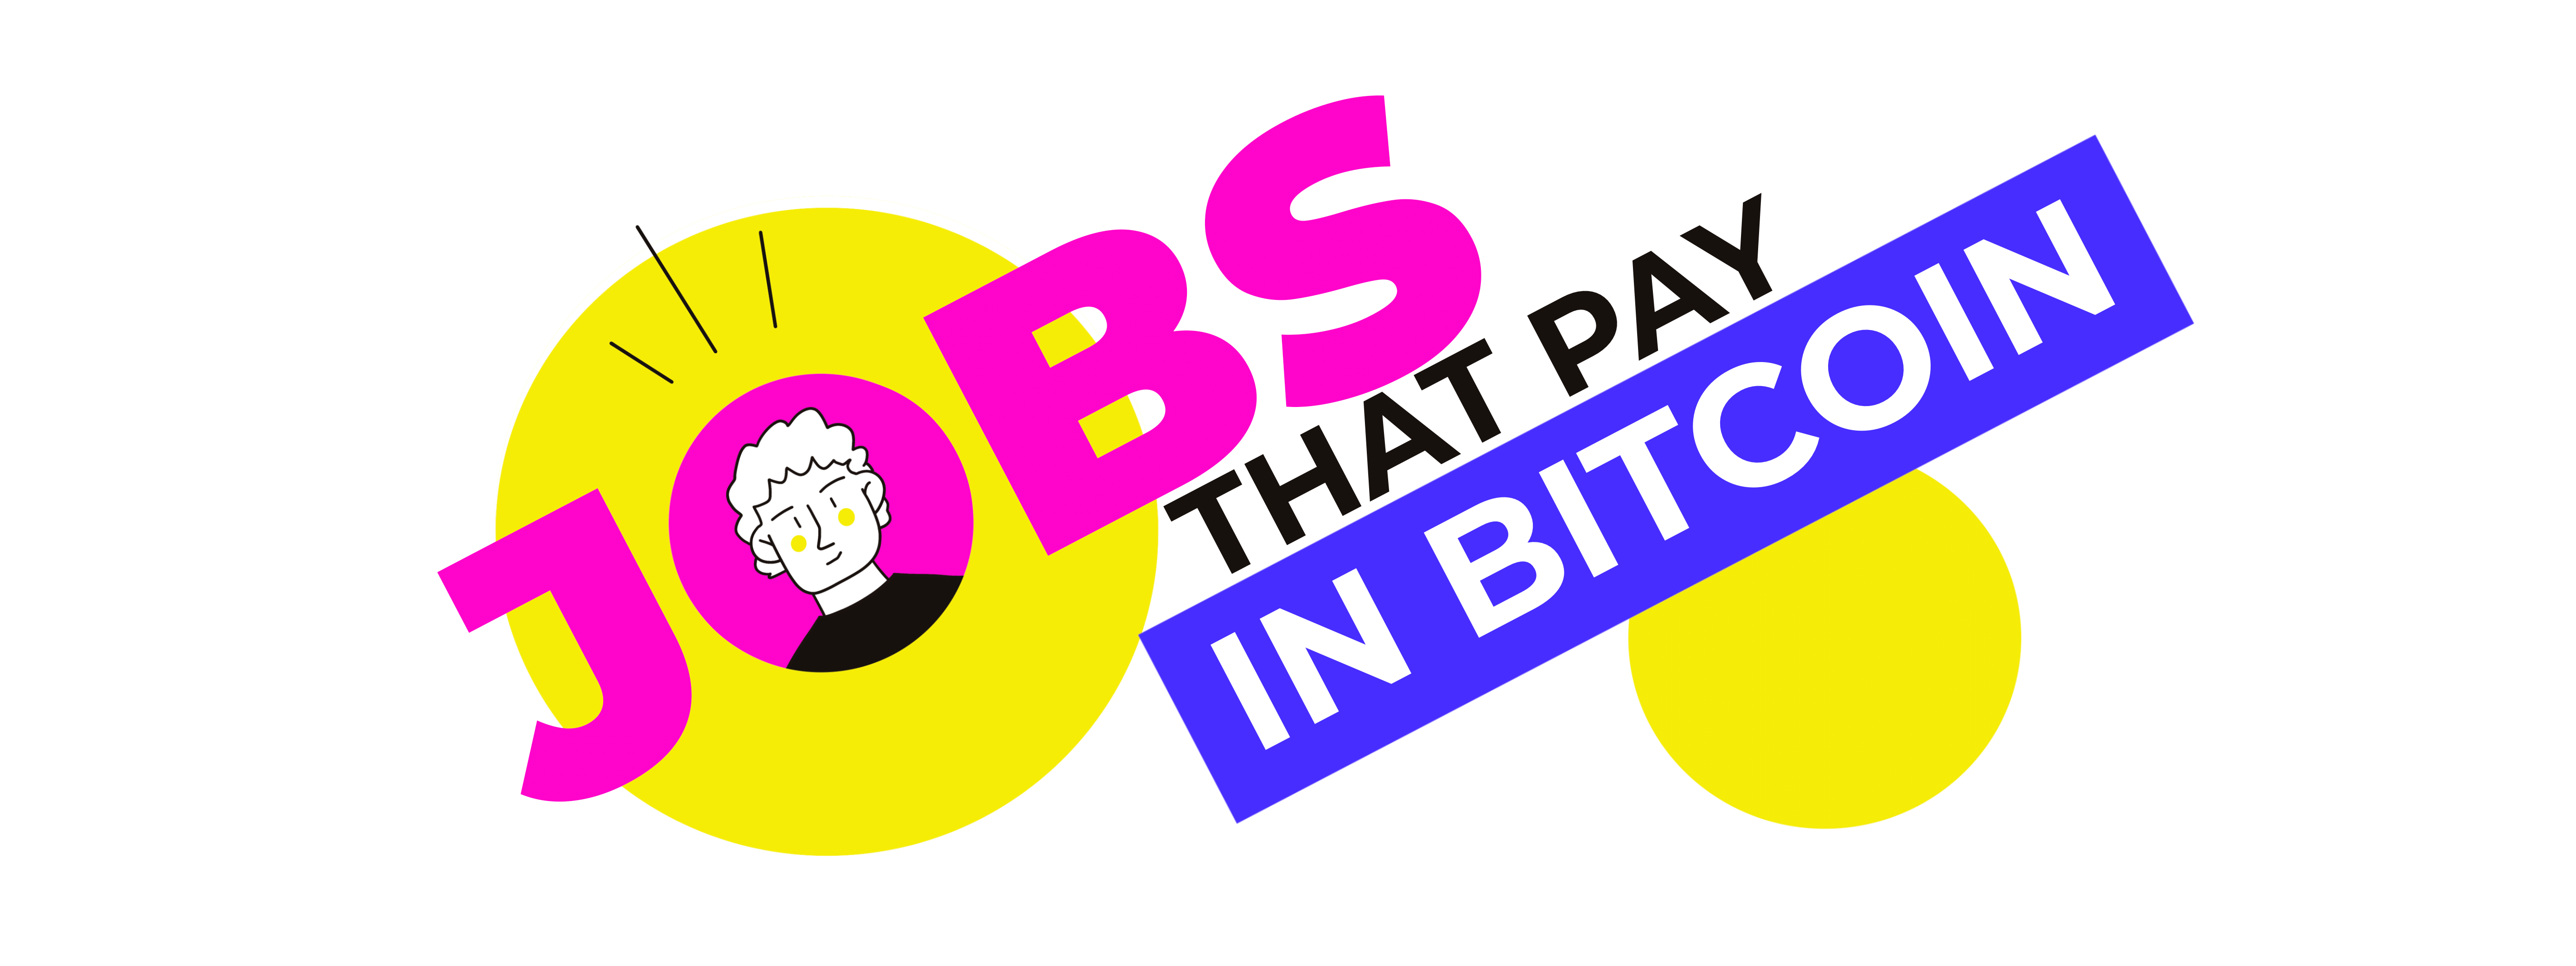 investing in bitcoin companies hiring